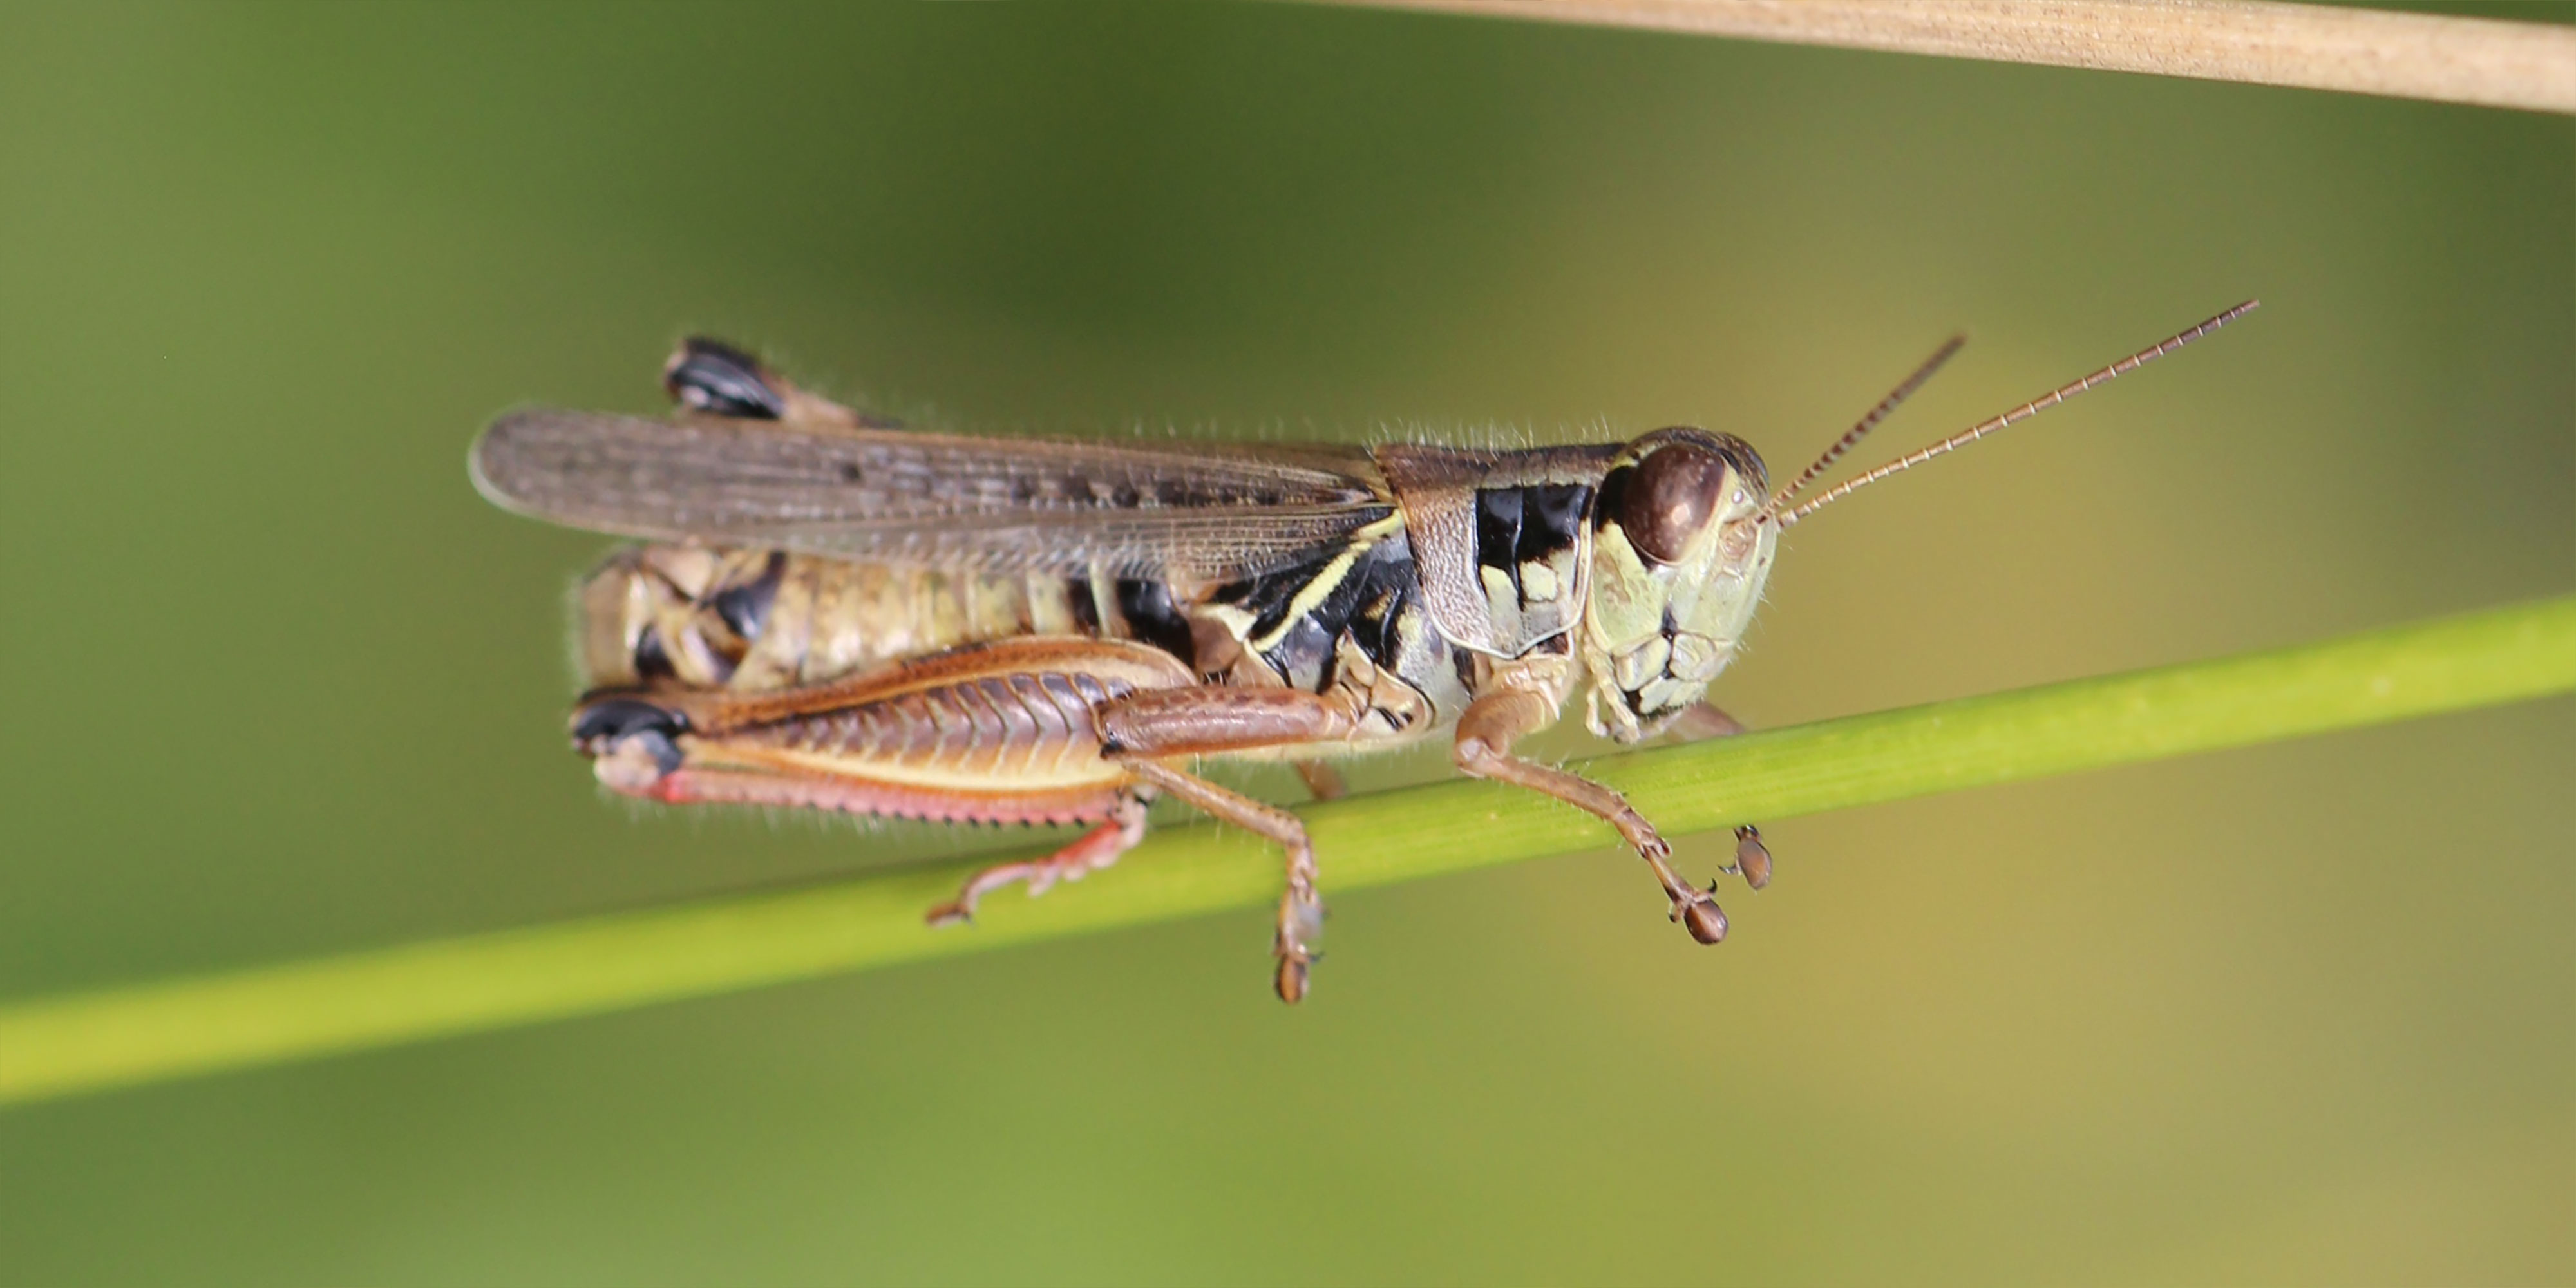 Green and black grasshopper with red hindlegs.